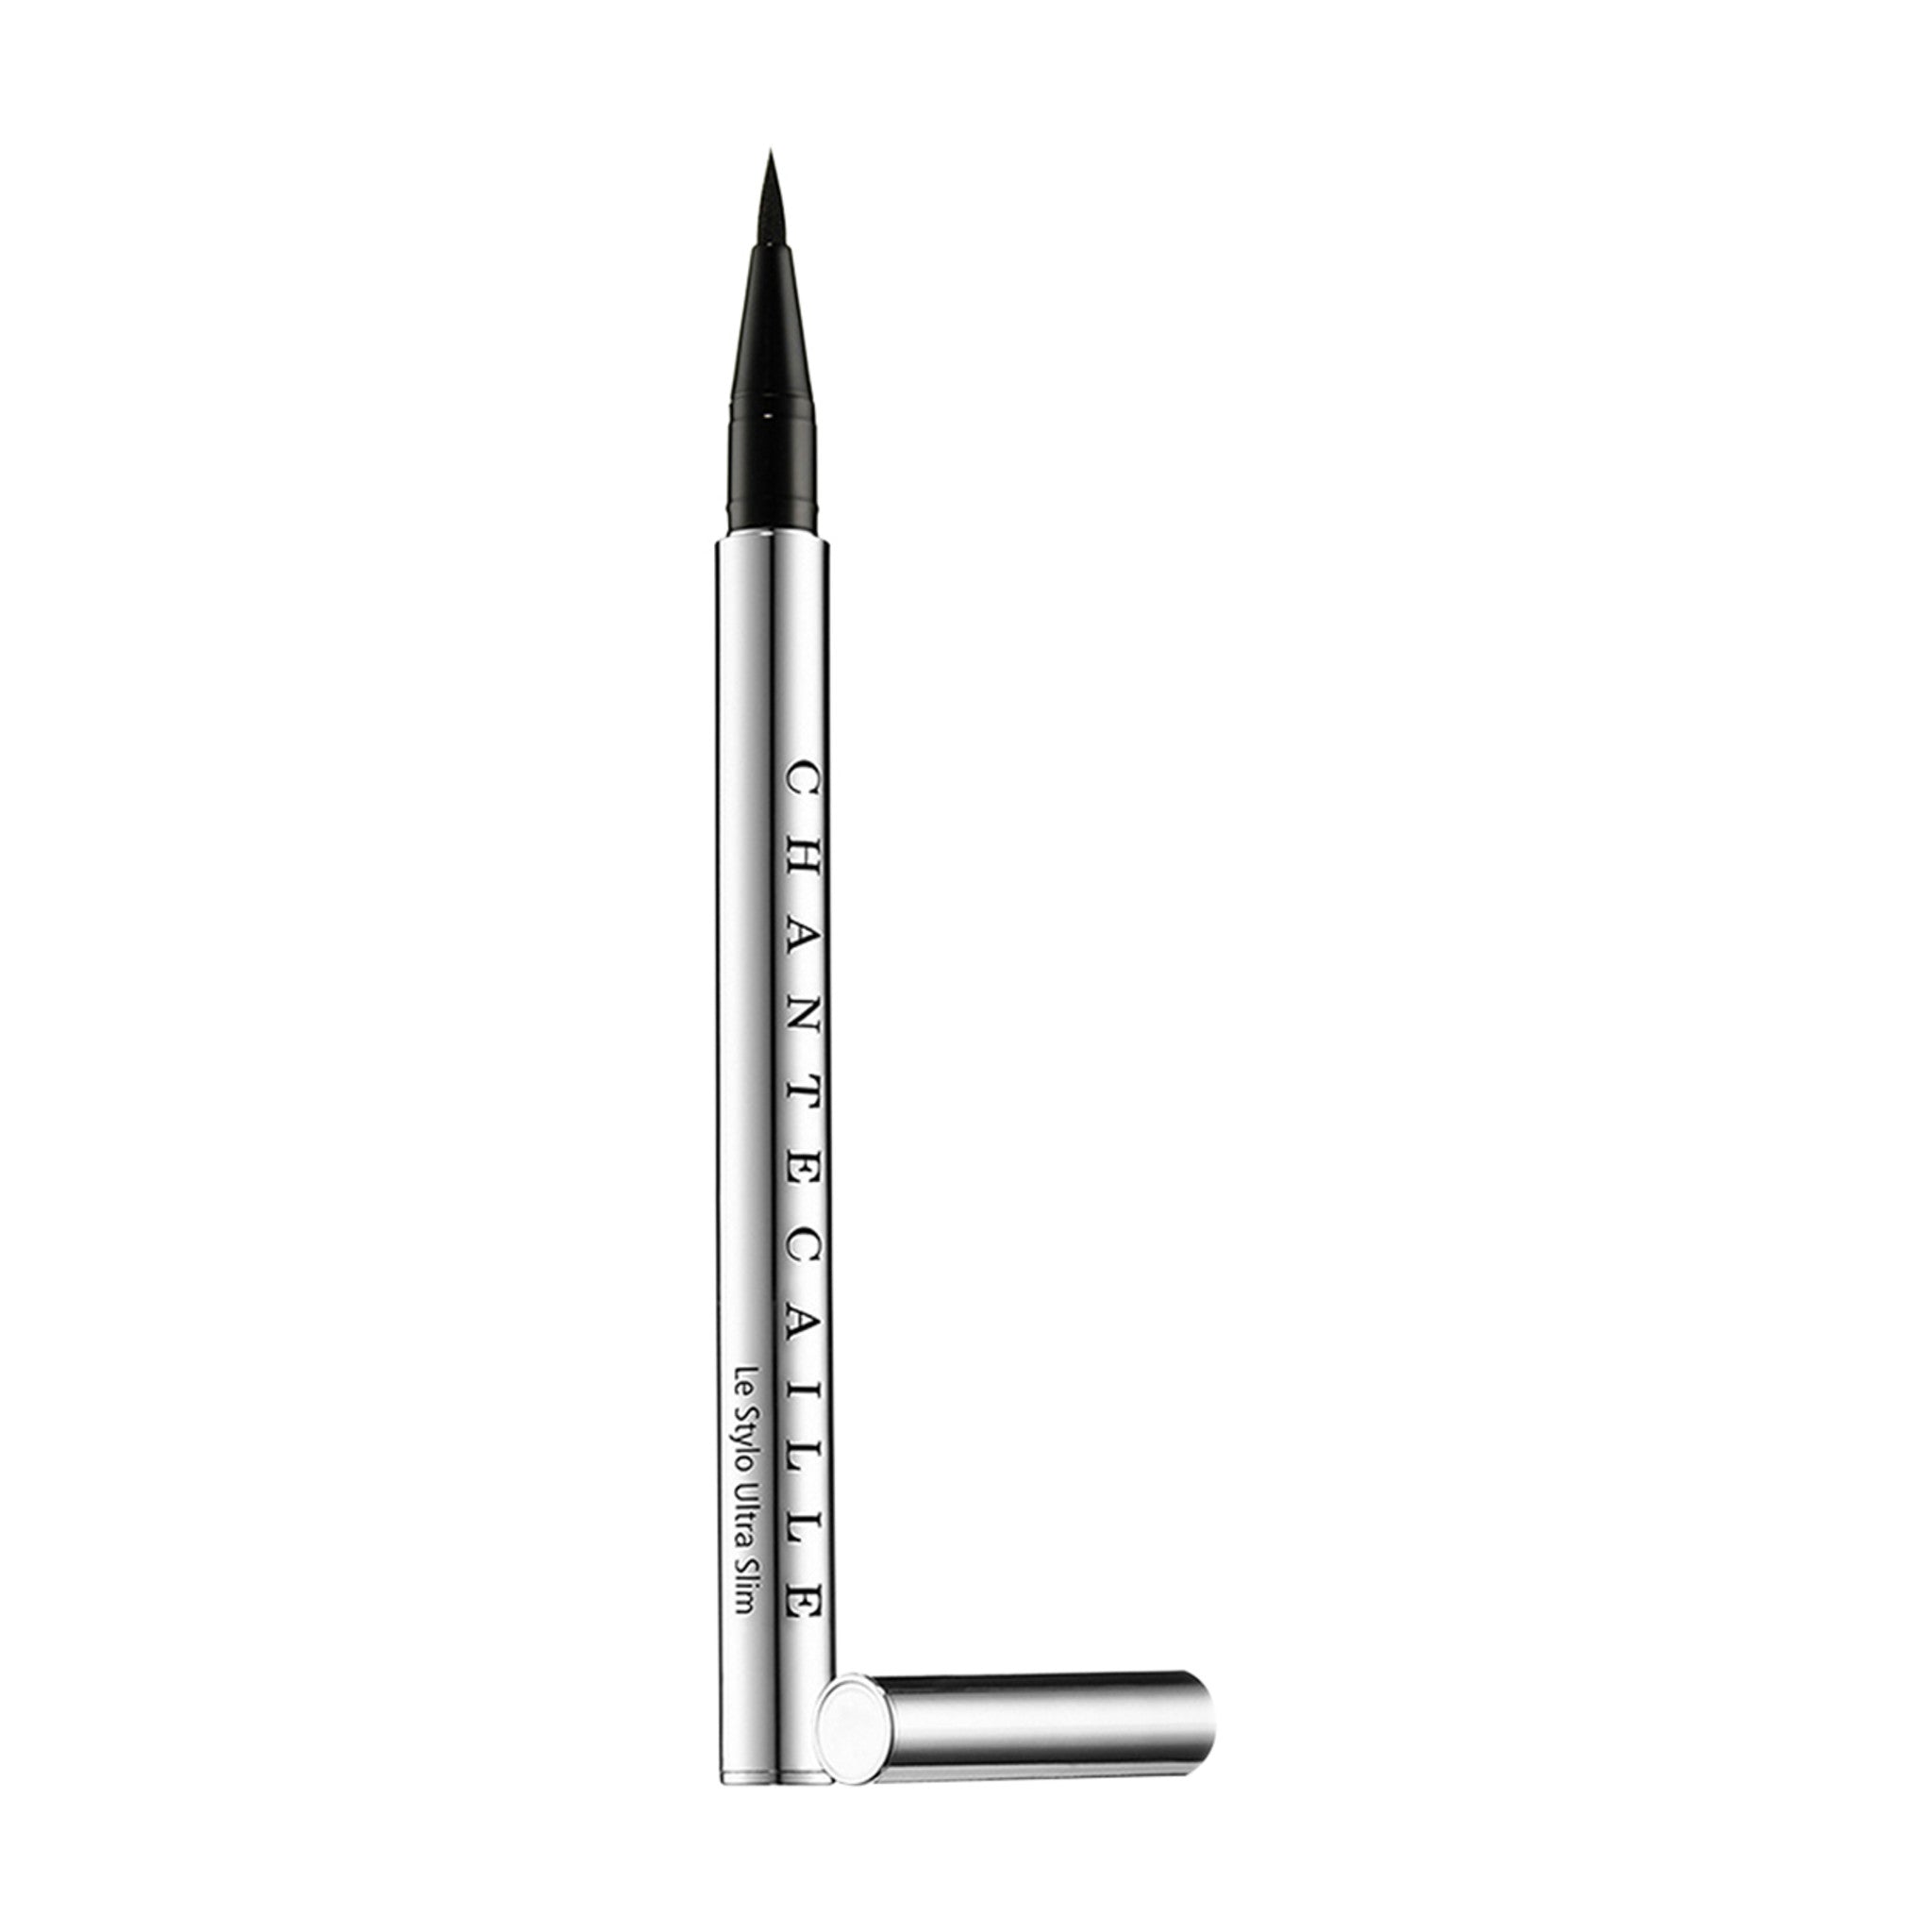 Chantecaille Le Stylo Ultra Slim Color/Shade variant: Black main image. This product is in the color black